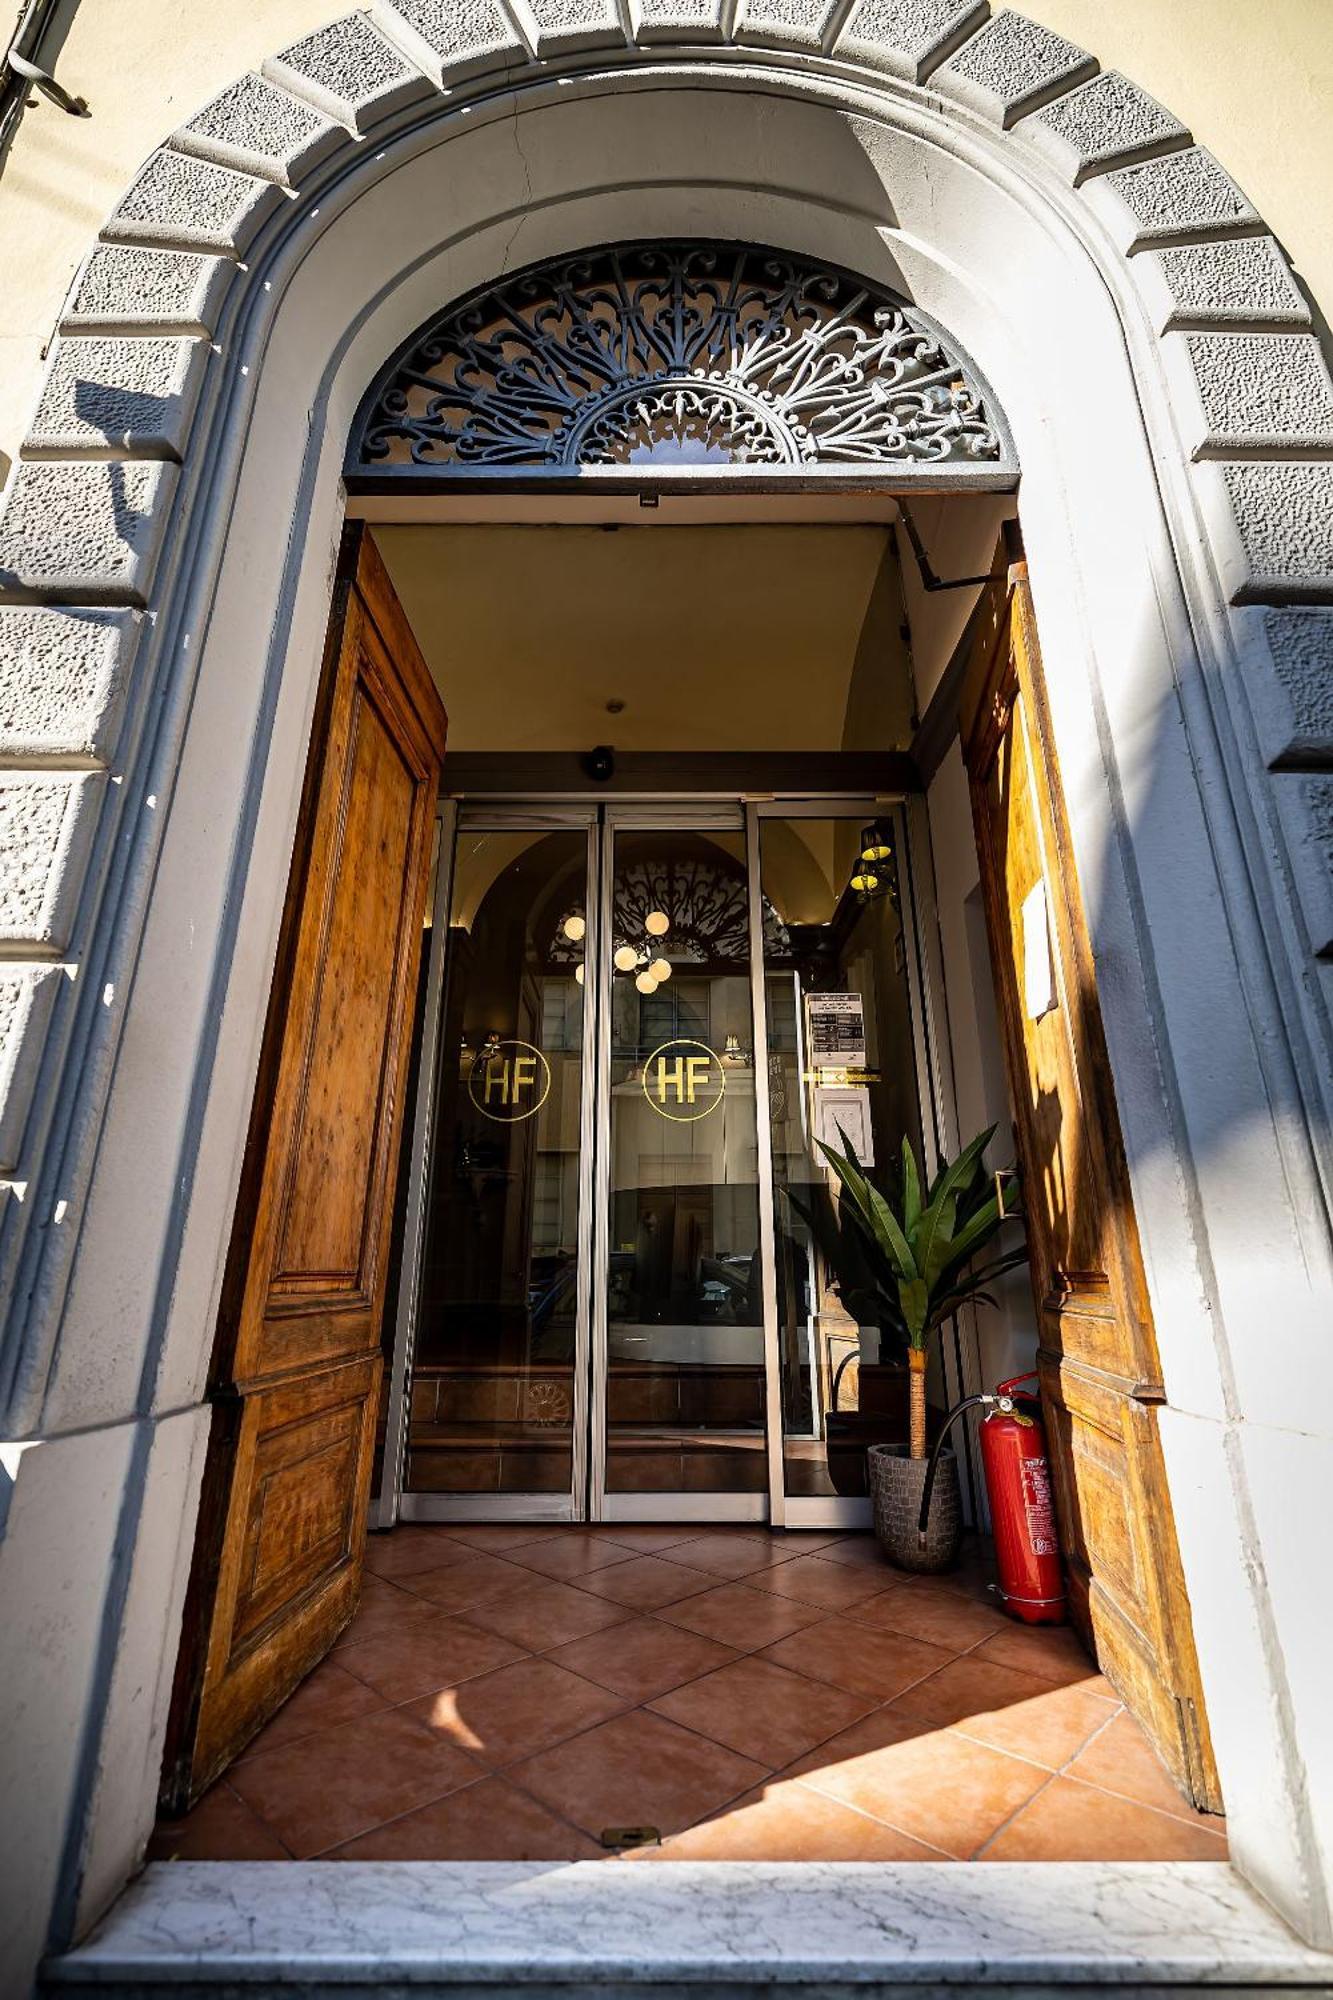 Hotel Ferrucci Florence Exterior photo